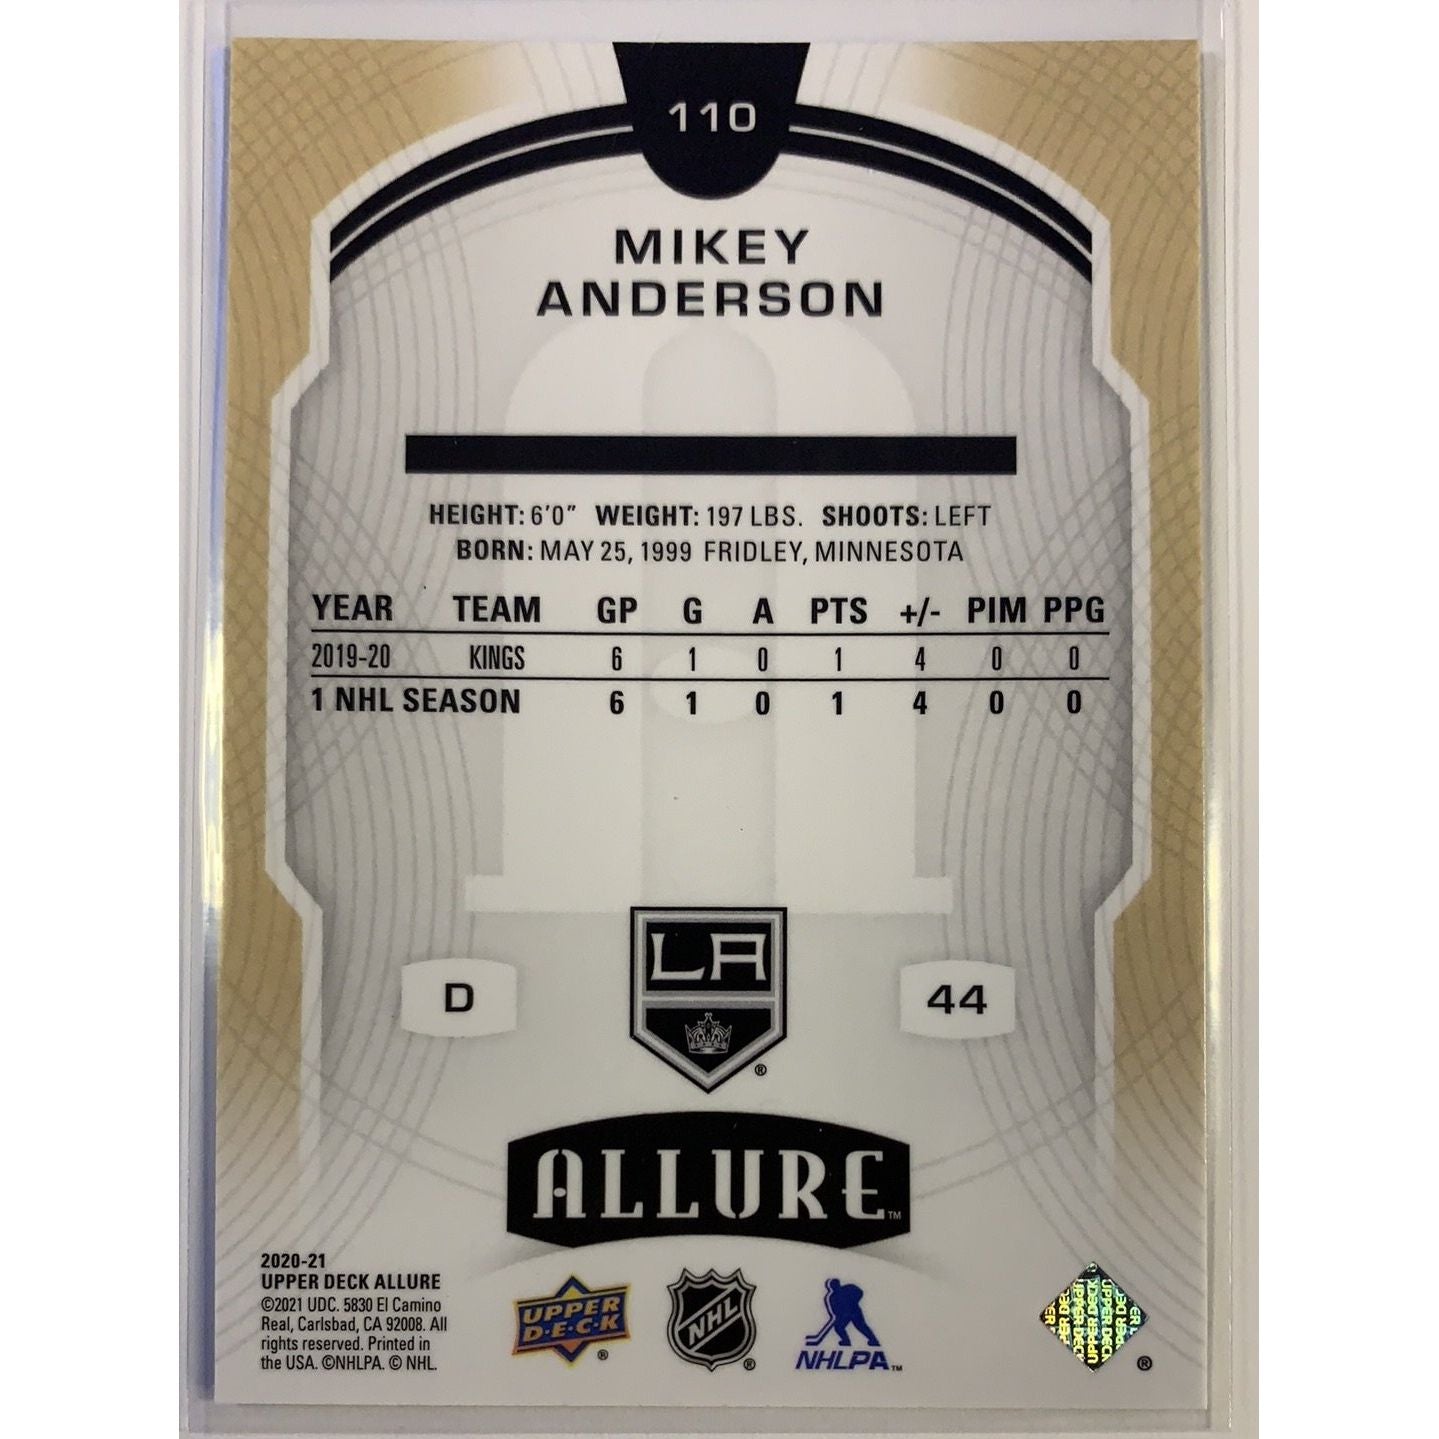  2020-21 Allure Mikey Anderson Rookie Card  Local Legends Cards & Collectibles